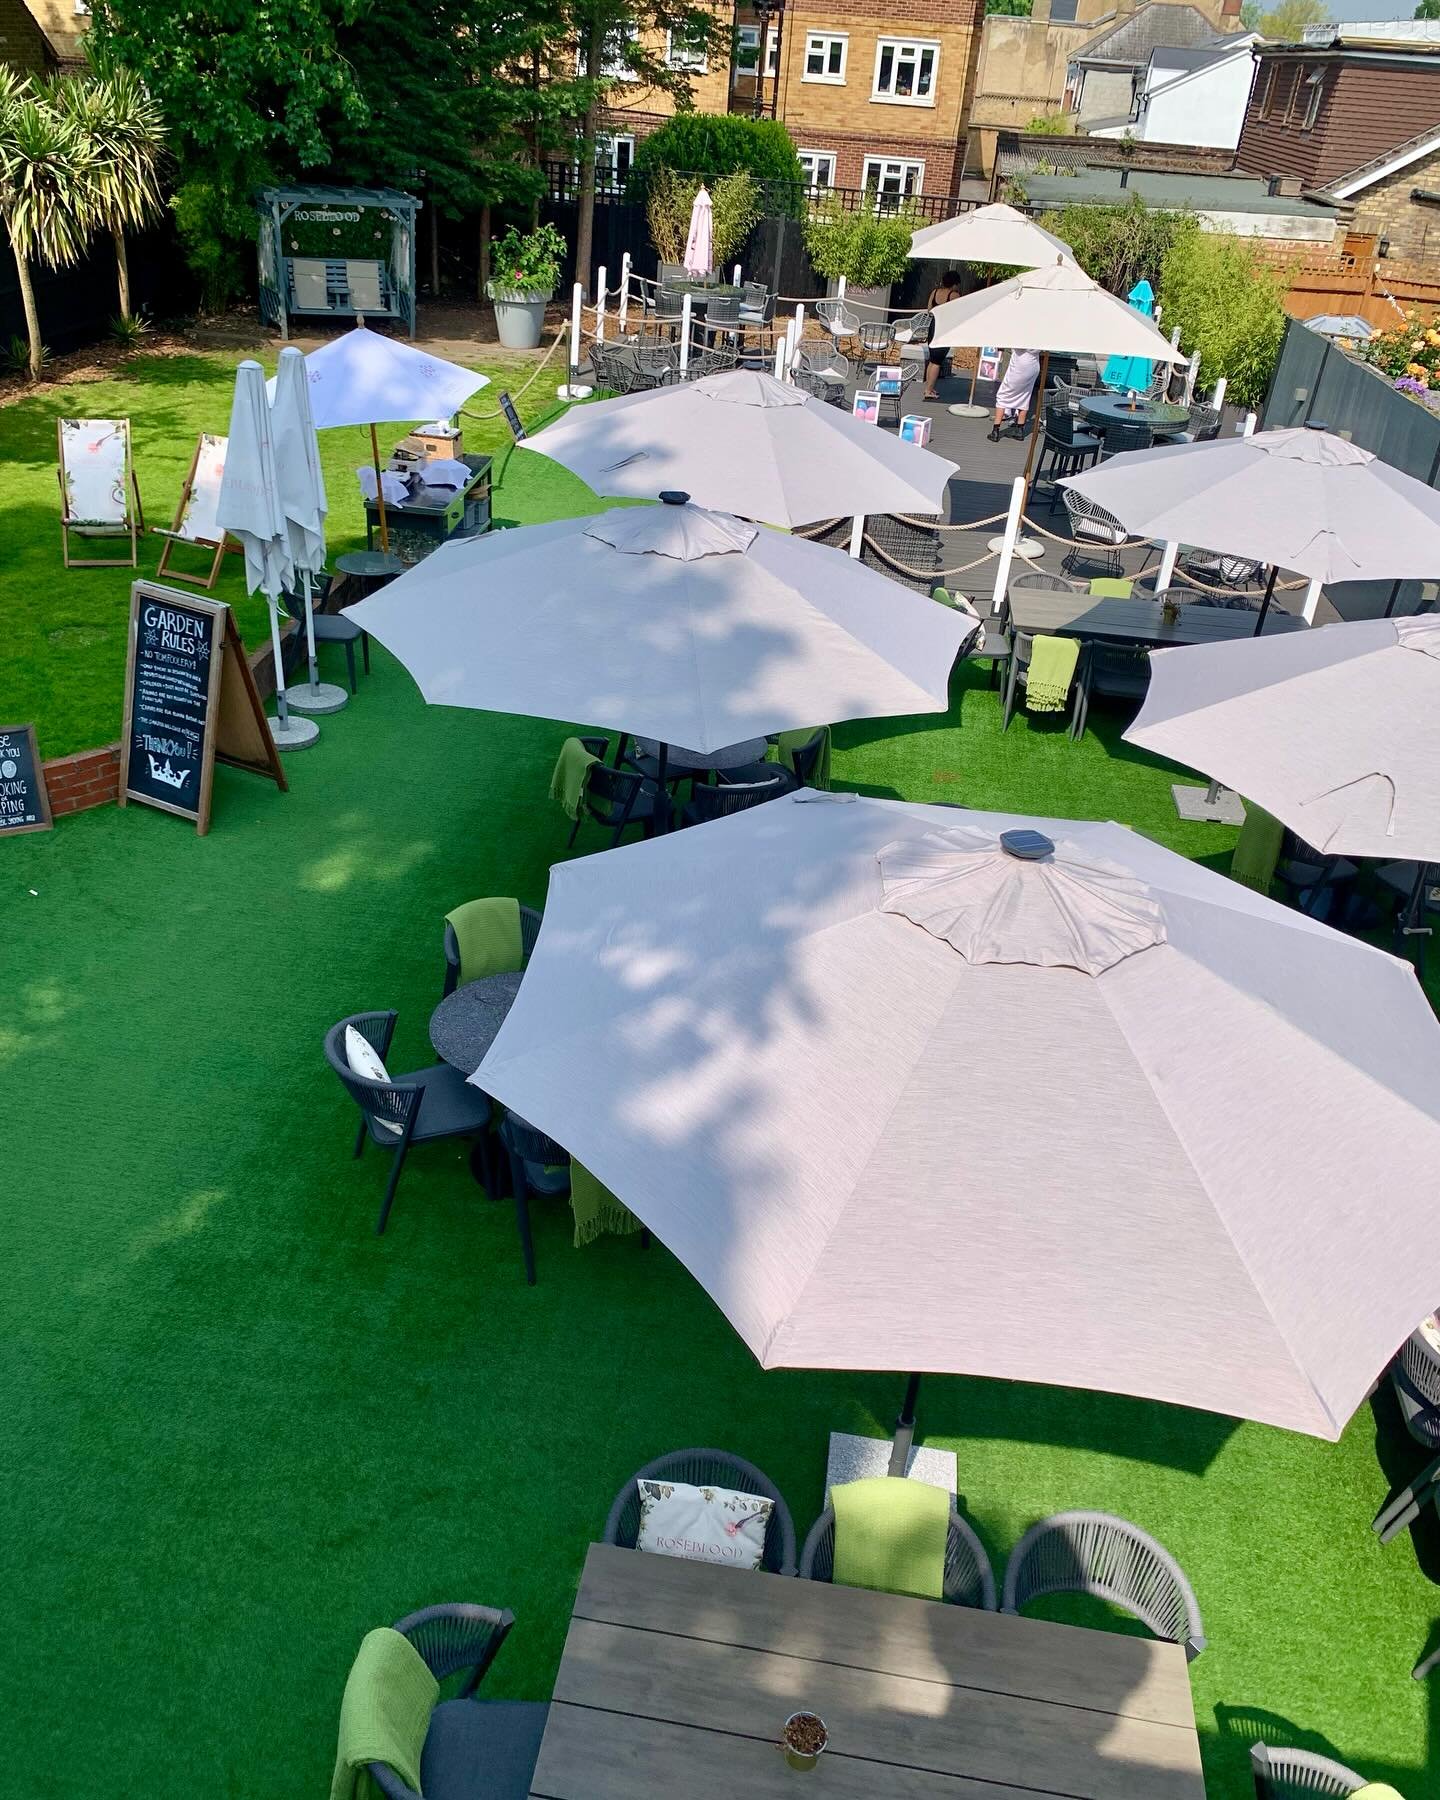 Too sunny for dining Al fresco? We got you - literally - covered!
Our new umbrellas are all up! 
☀️ come and join us on this lovely sunny day ☀️ 
#summervibes #twickenham #hamptom #pubsofinstagram #pubsoflondon #dinealfresco #teddington #beergarden #